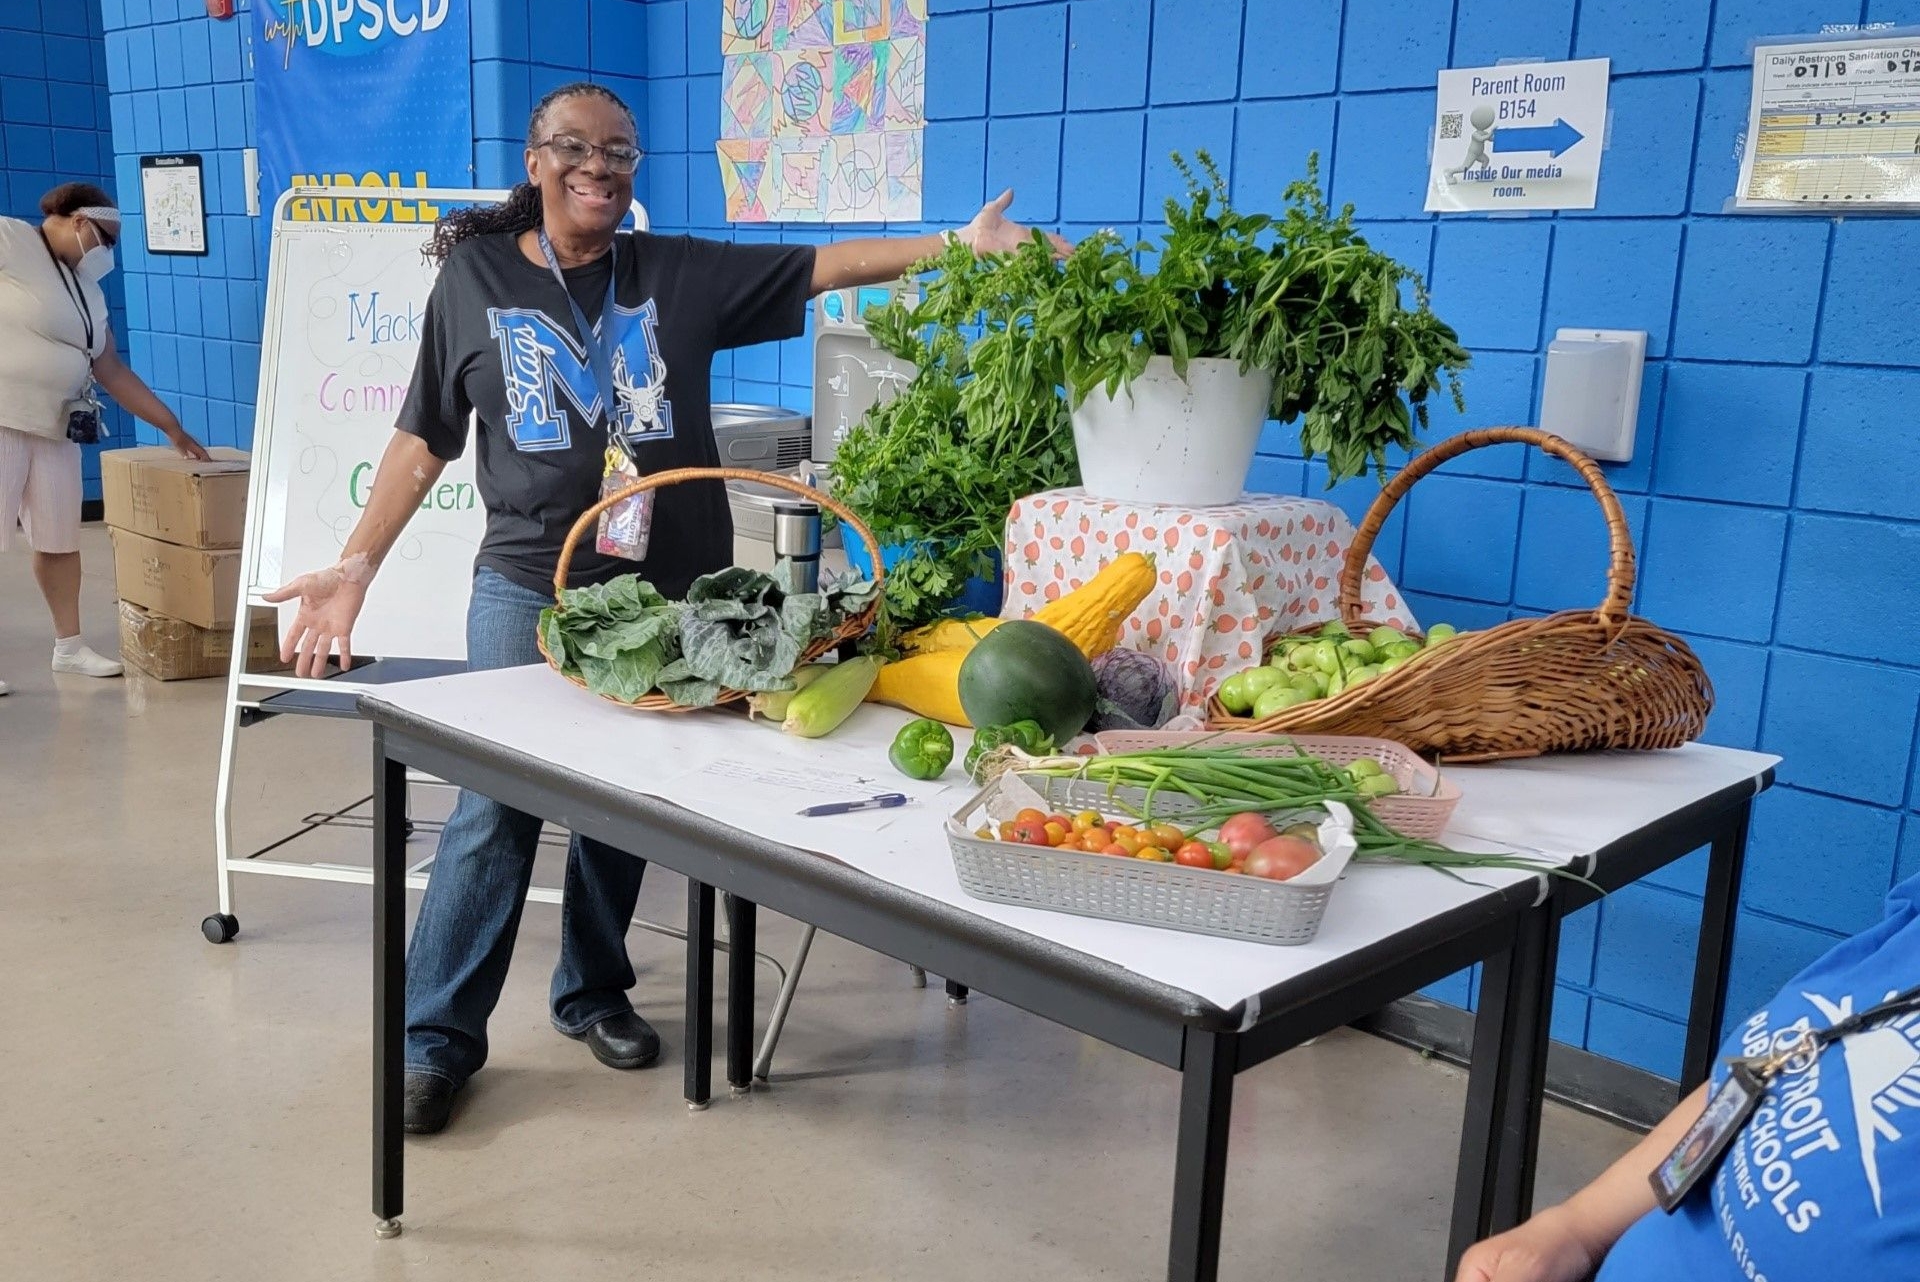 TSO-UP participant Shirley Brezzell, a science teacher at Mackenzie Elementary-Middle School in Detroit, displays a bountiful harvest from the school's rejuvenated vegetable garden.